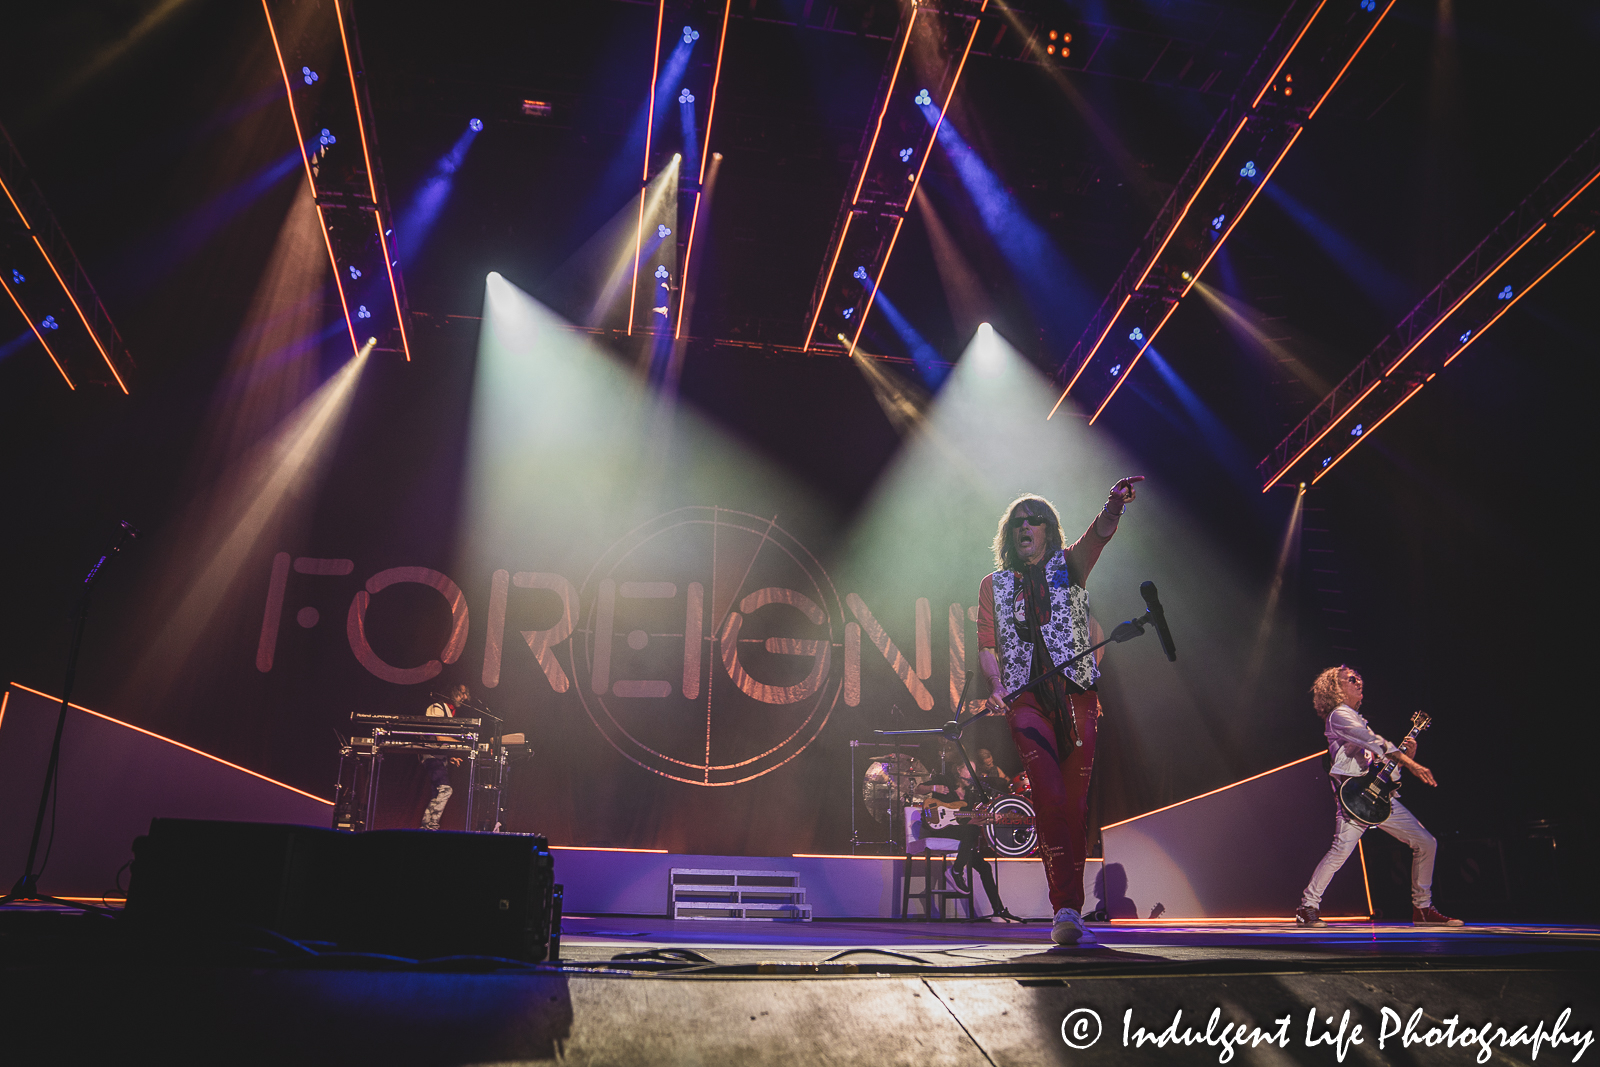 Foreigner live in concert on "The Historic Farewell Tour" at Starlight Theatre in Kansas City, MO on July 18, 2023.